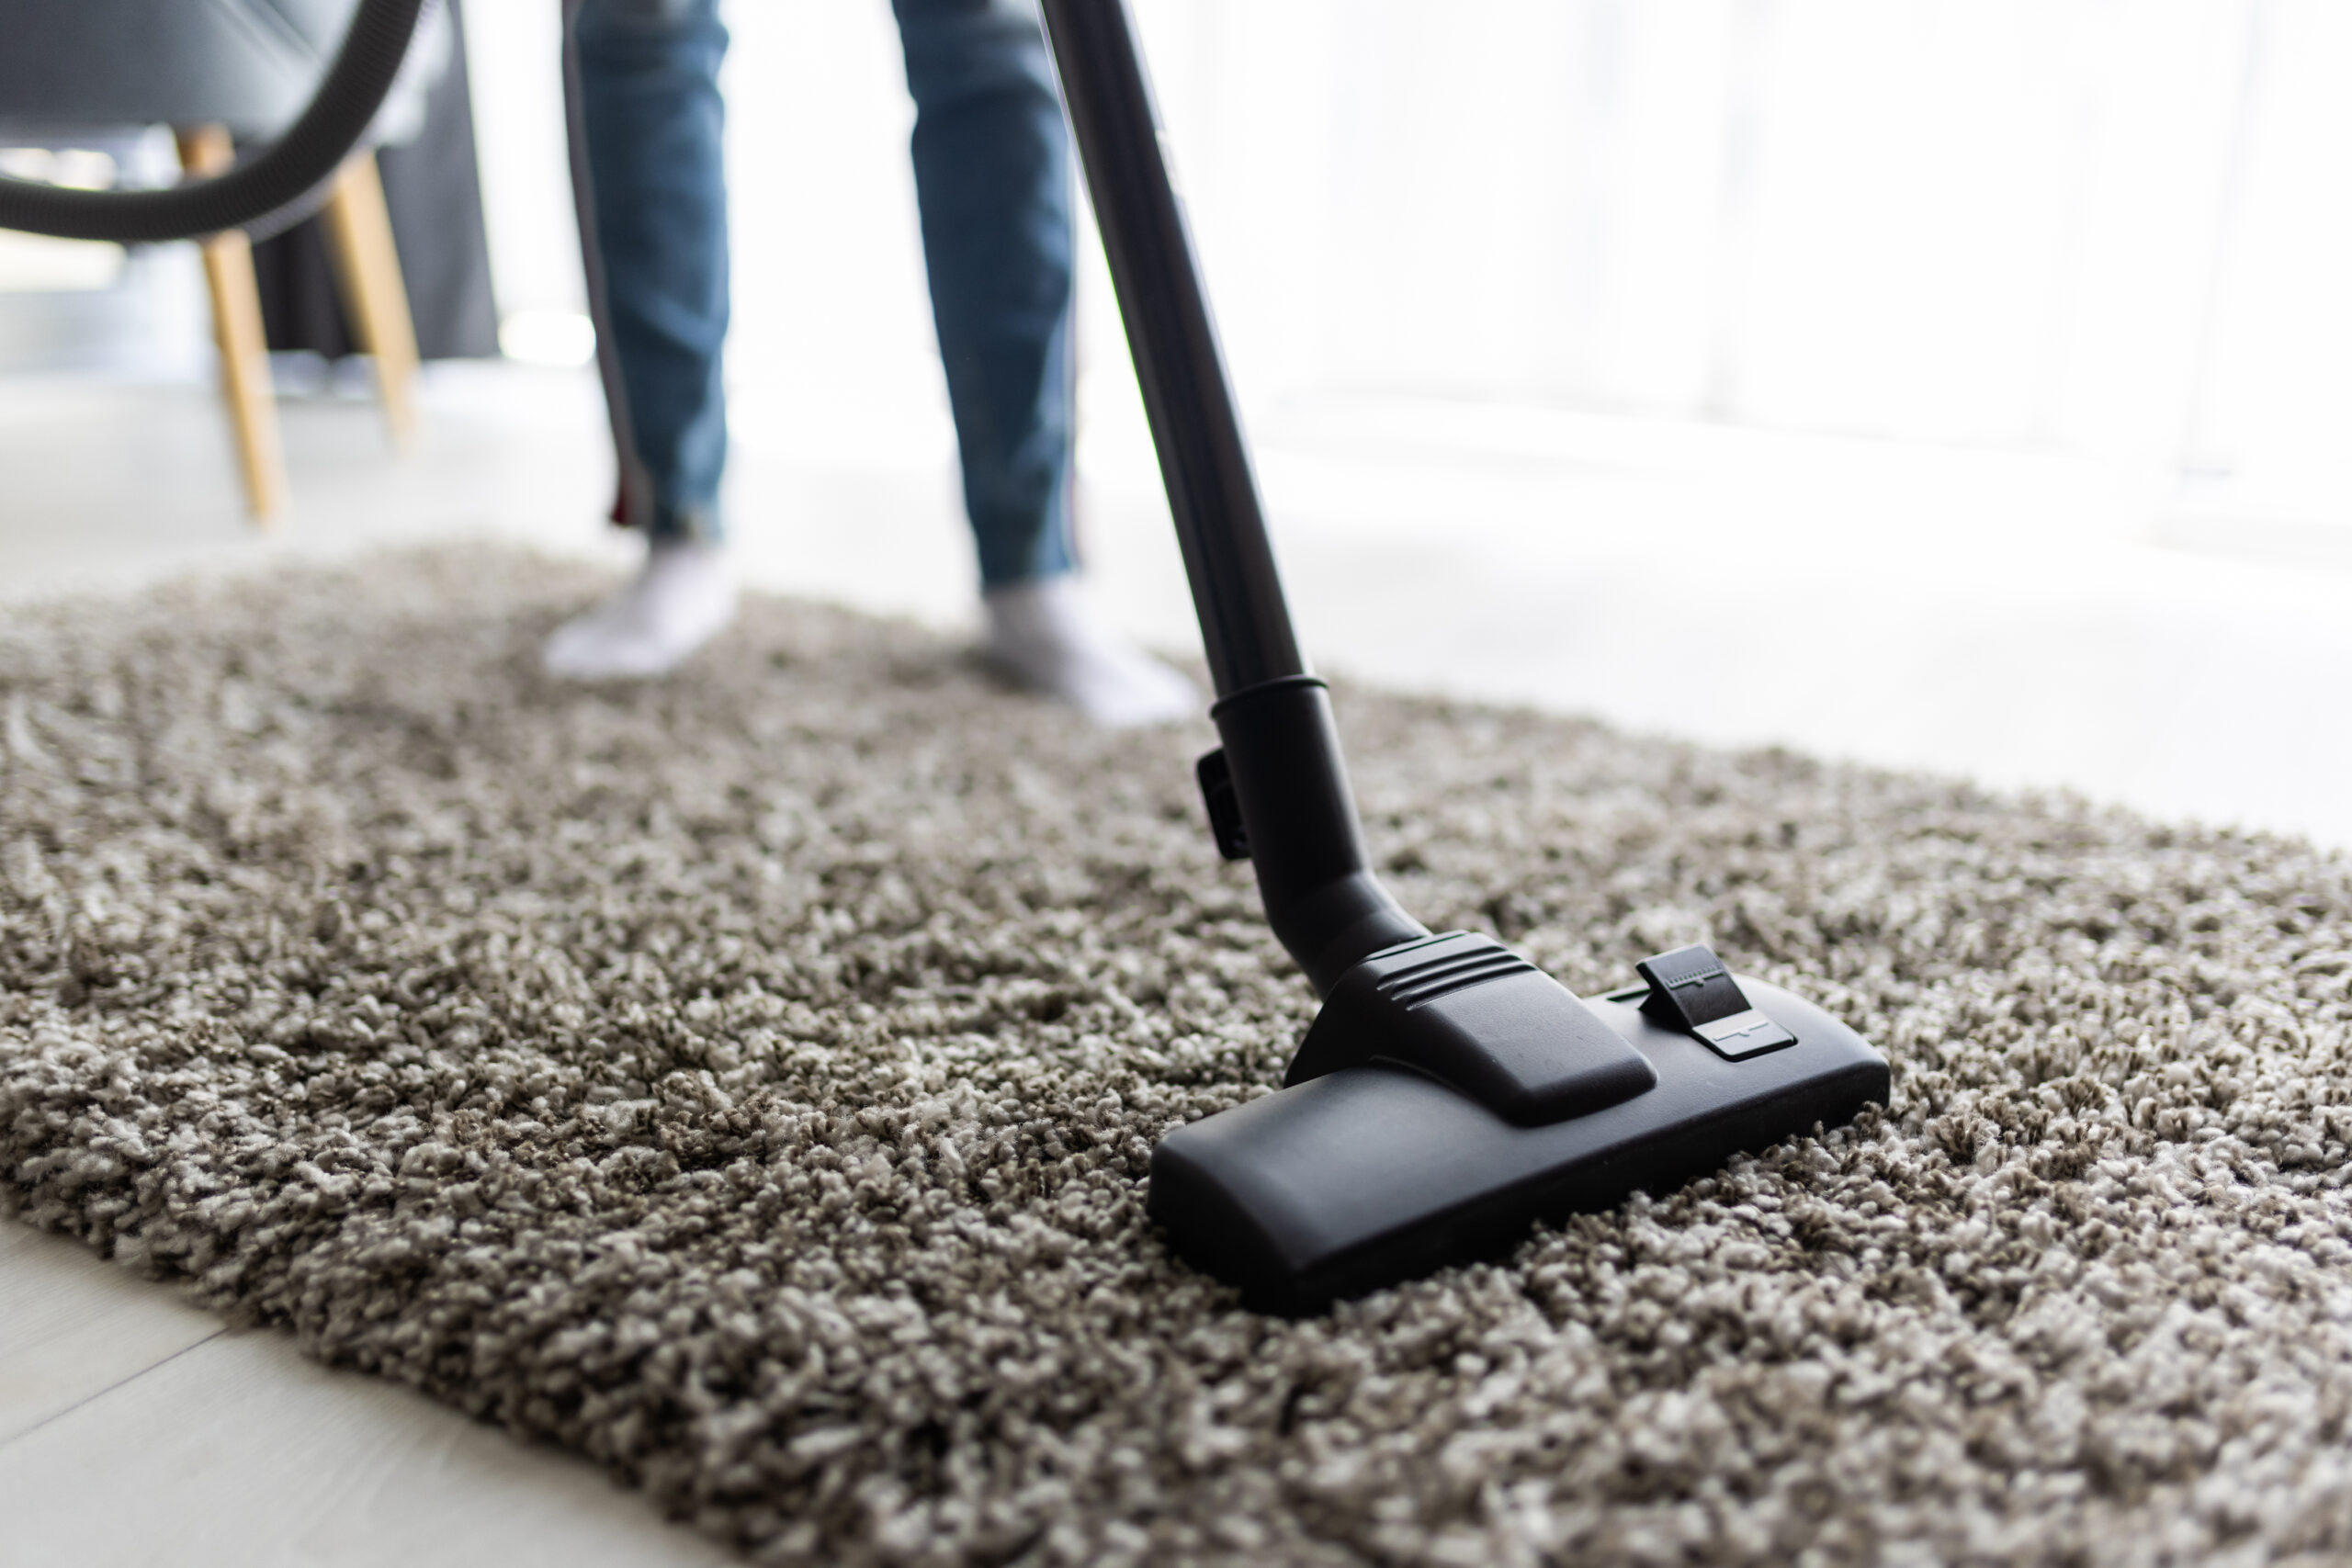 The Pros of Professional Carpet Cleaning Services